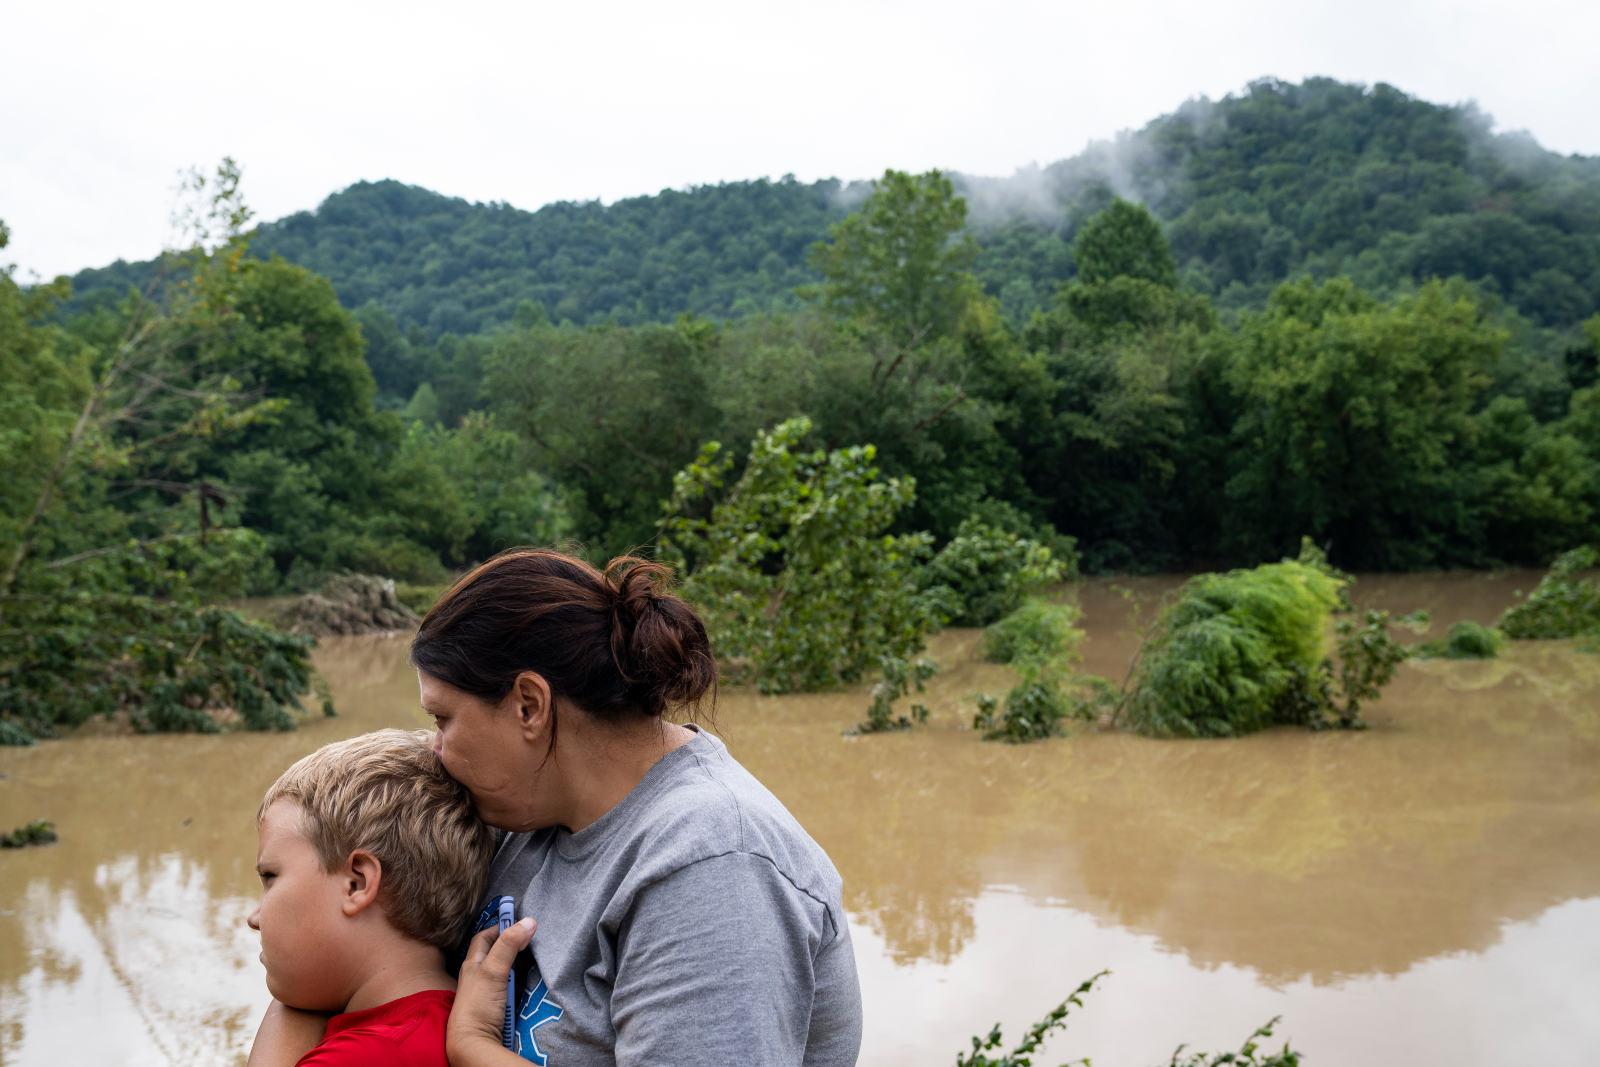 A women with brown hair holds a boy with blond hair. In the background, floodwaters are seen with debris and downed trees in front of a mountain landscape.